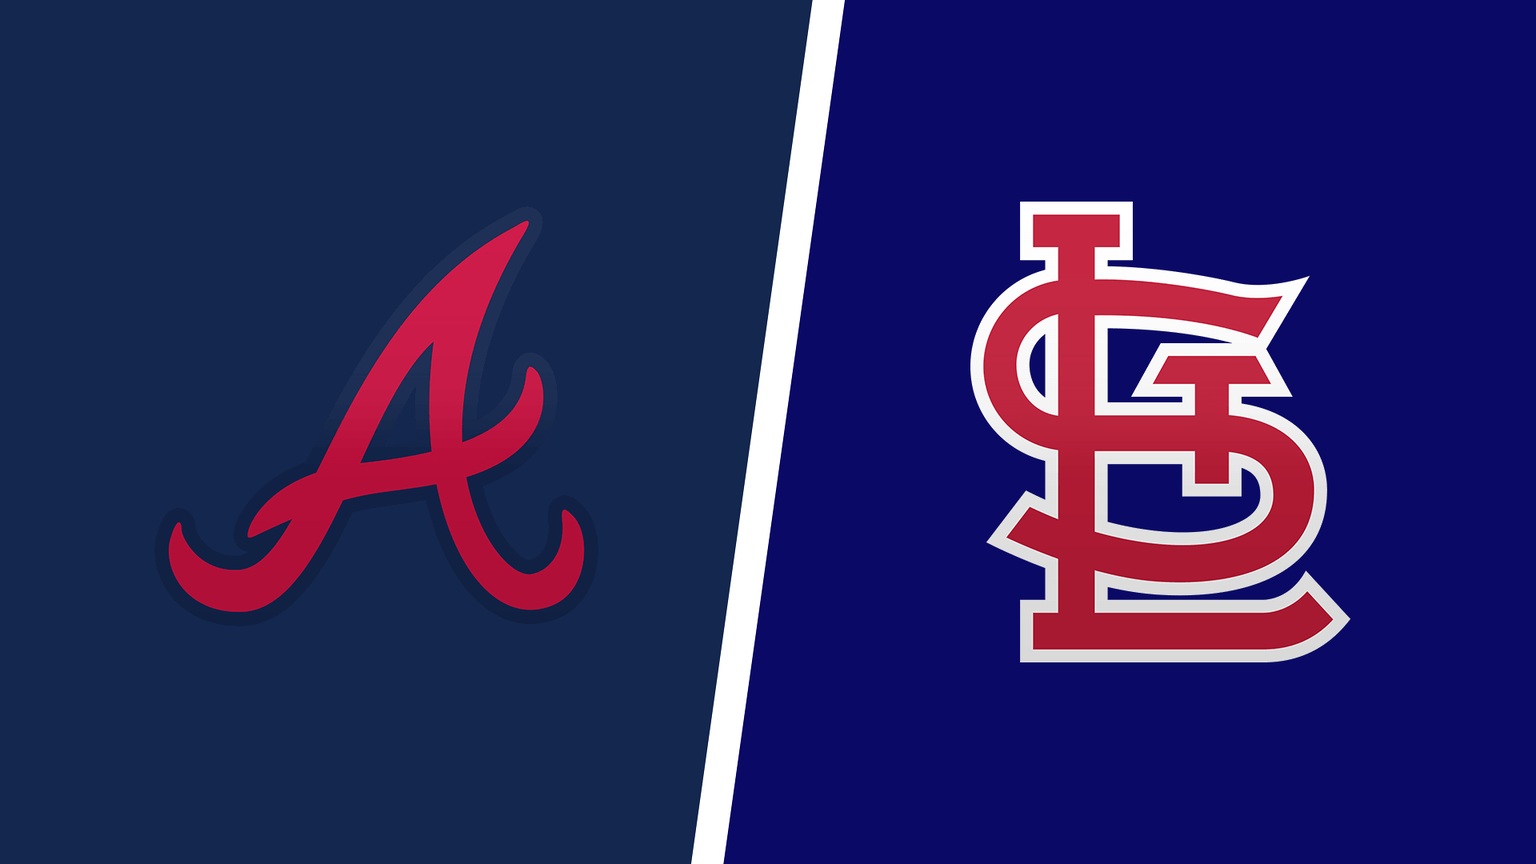 How to Watch St. Louis Cardinals vs. Atlanta Braves Live Online on July